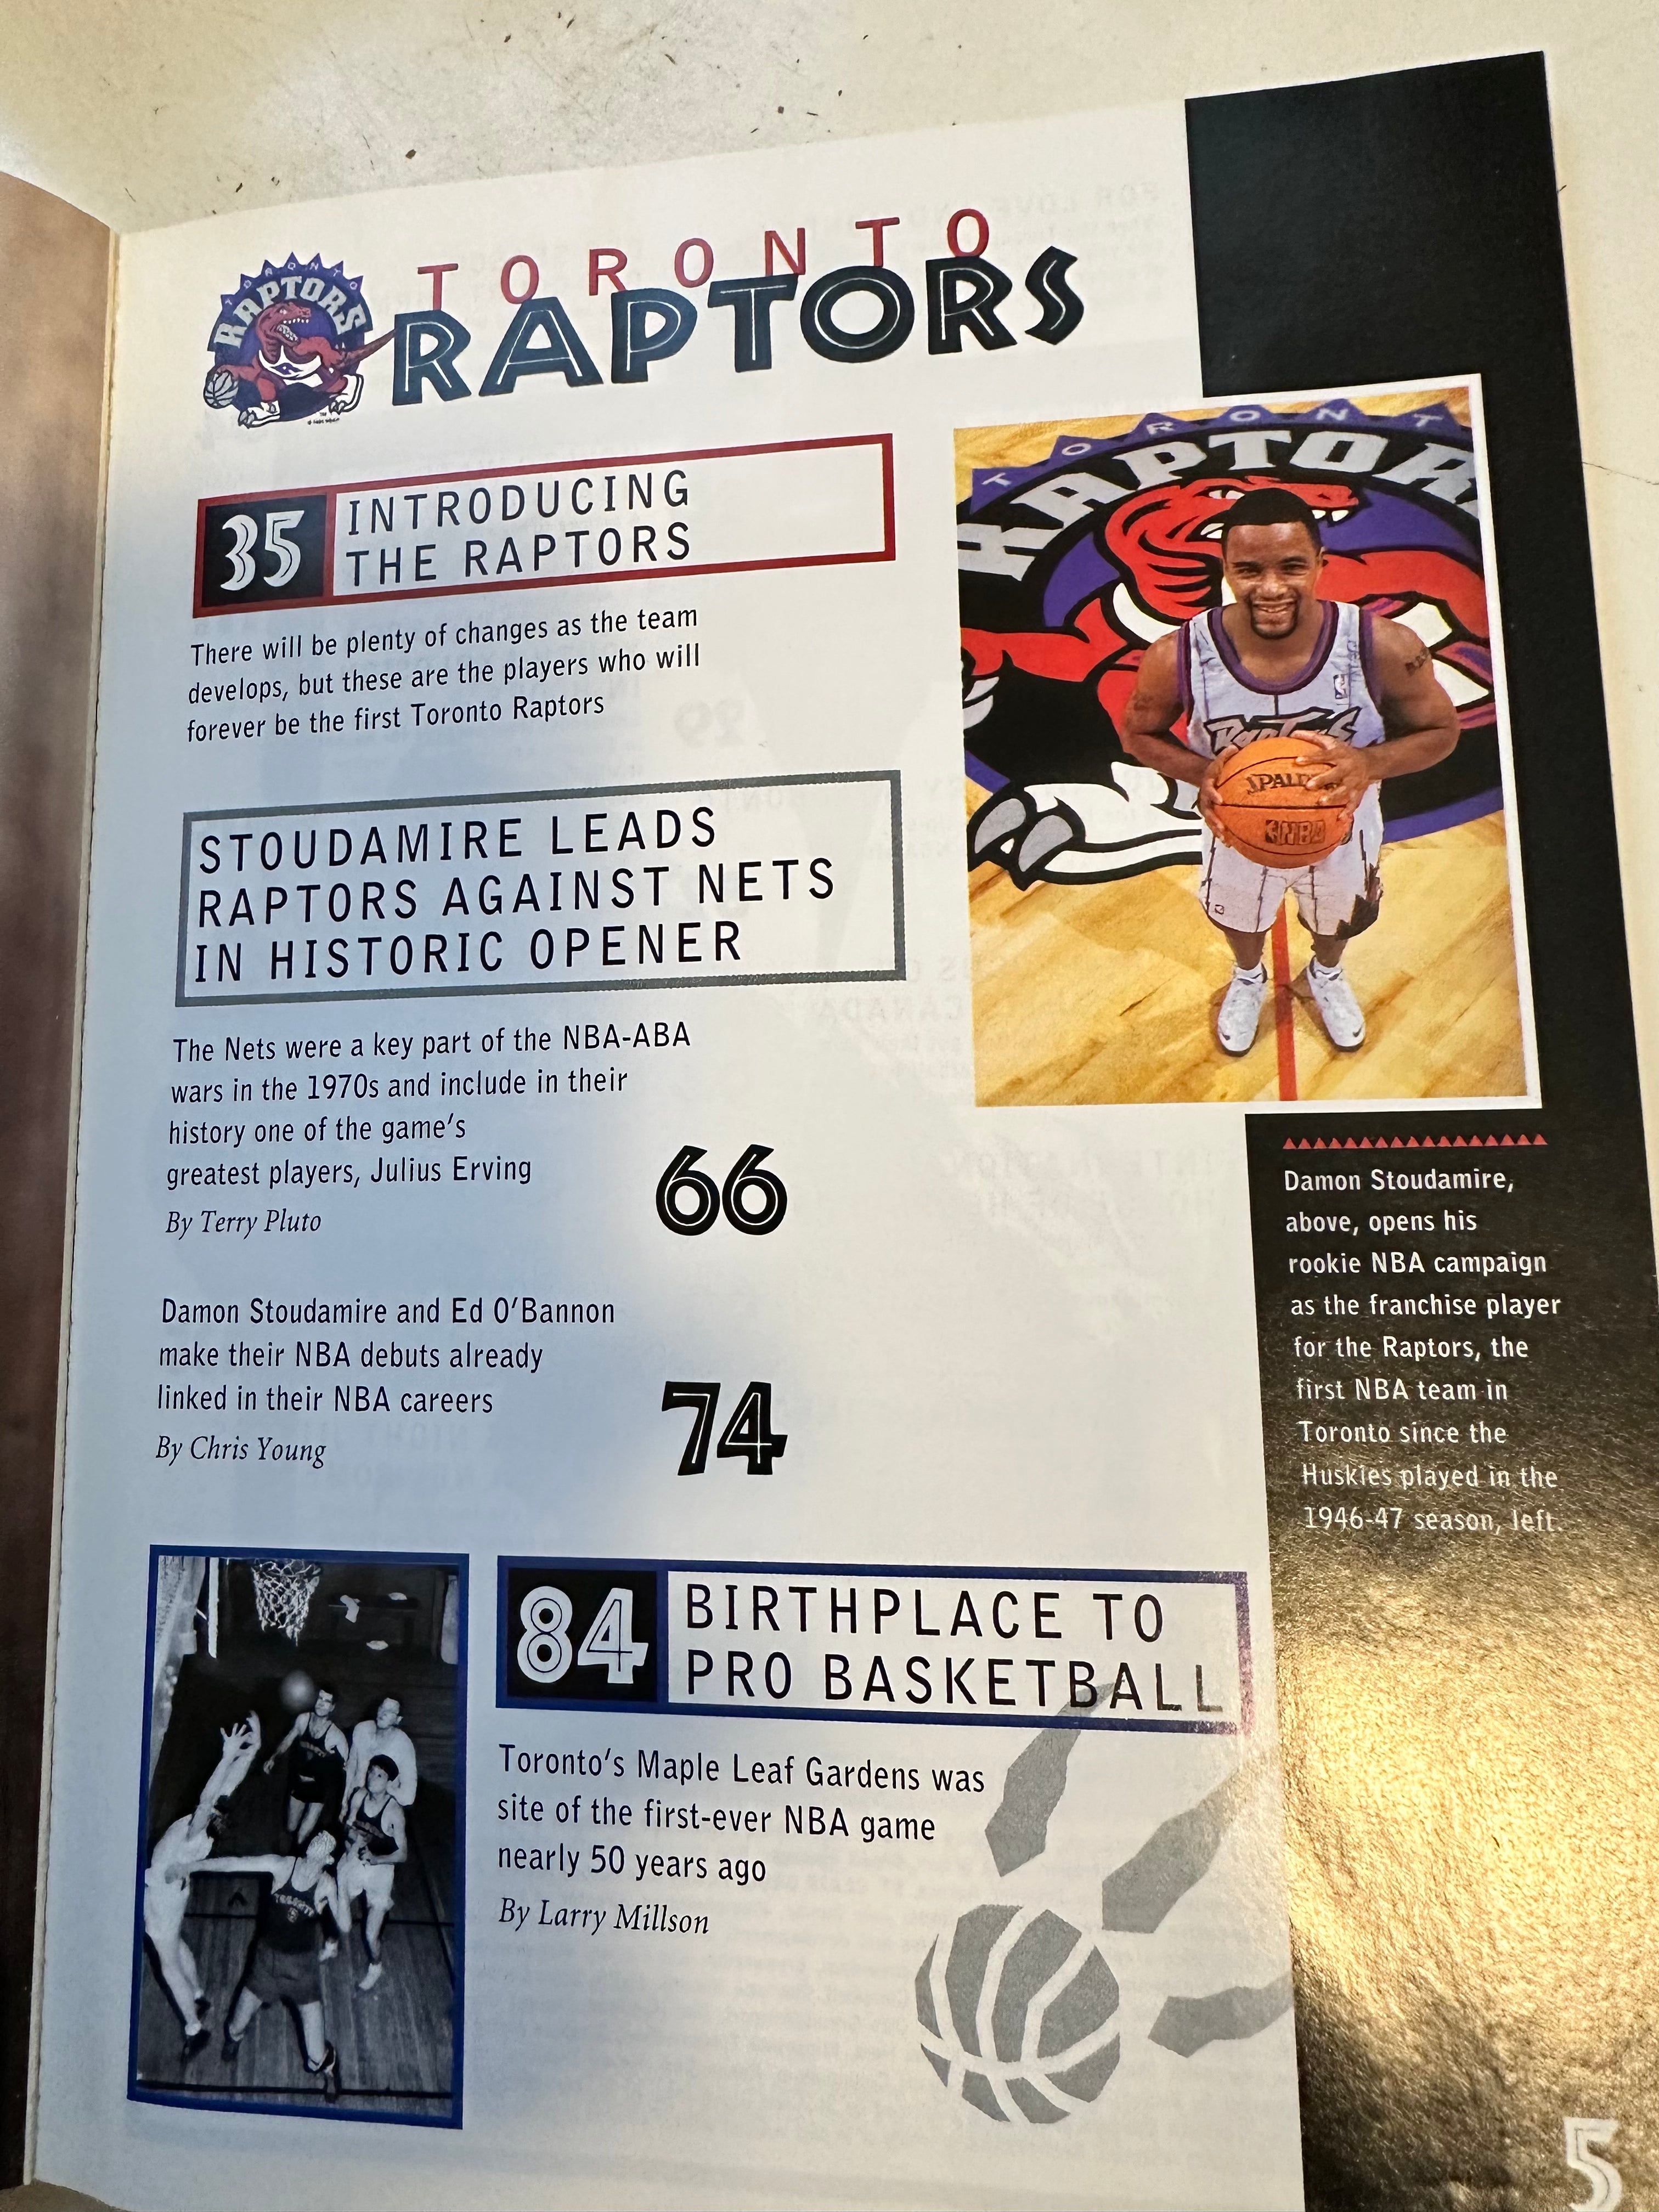 Toronto Raptors basketball first game program with two tickets 1995